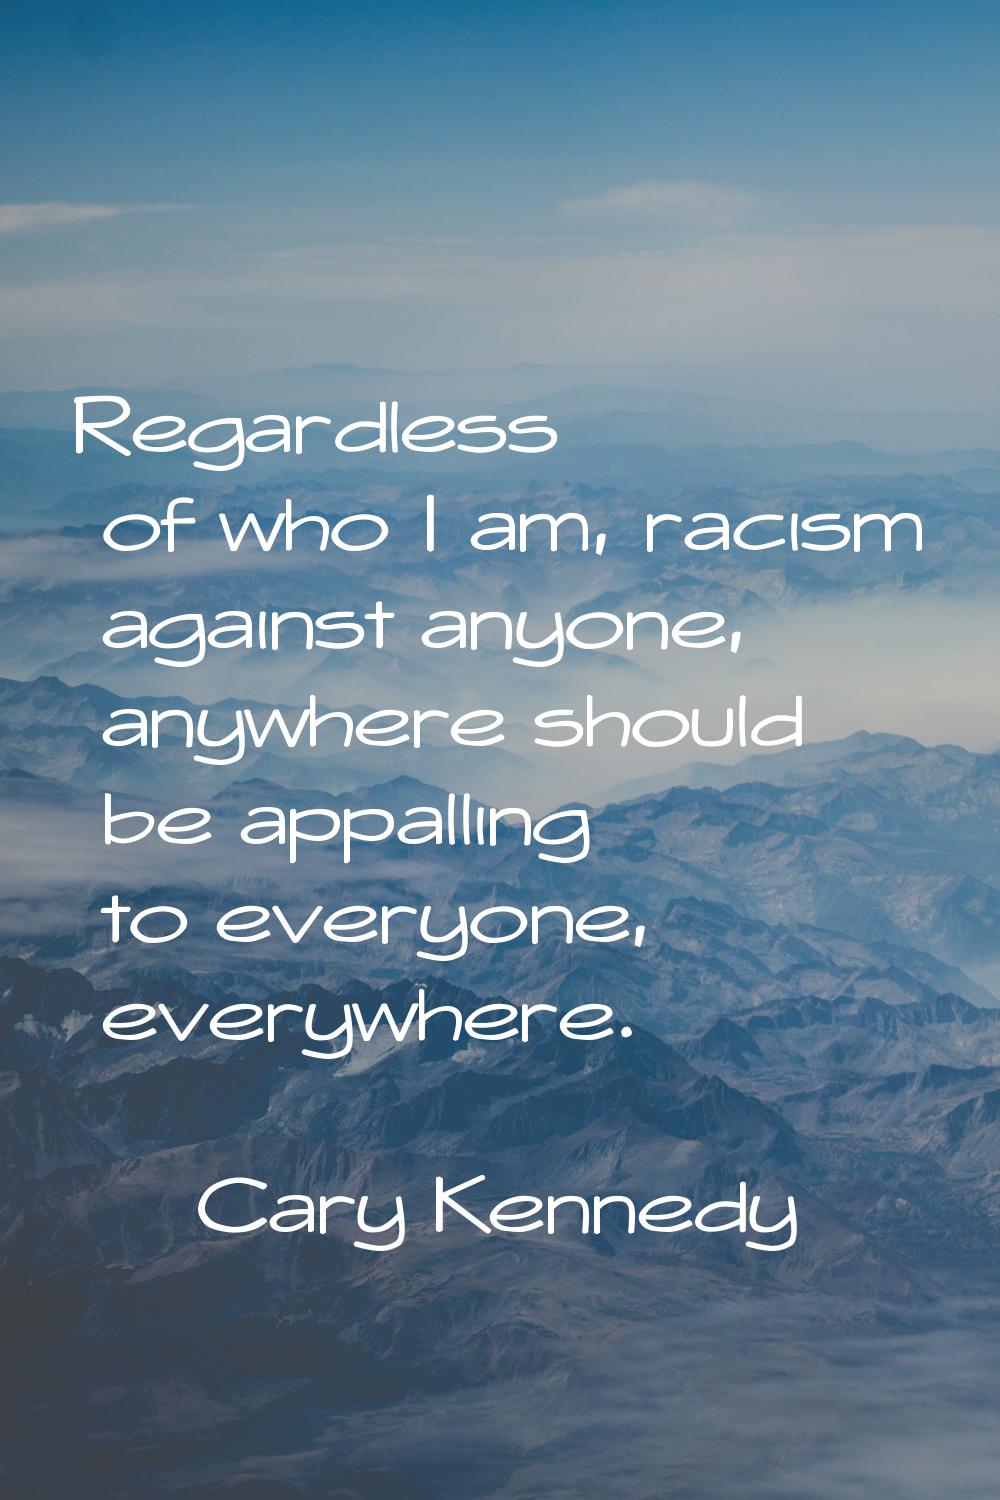 Regardless of who I am, racism against anyone, anywhere should be appalling to everyone, everywhere